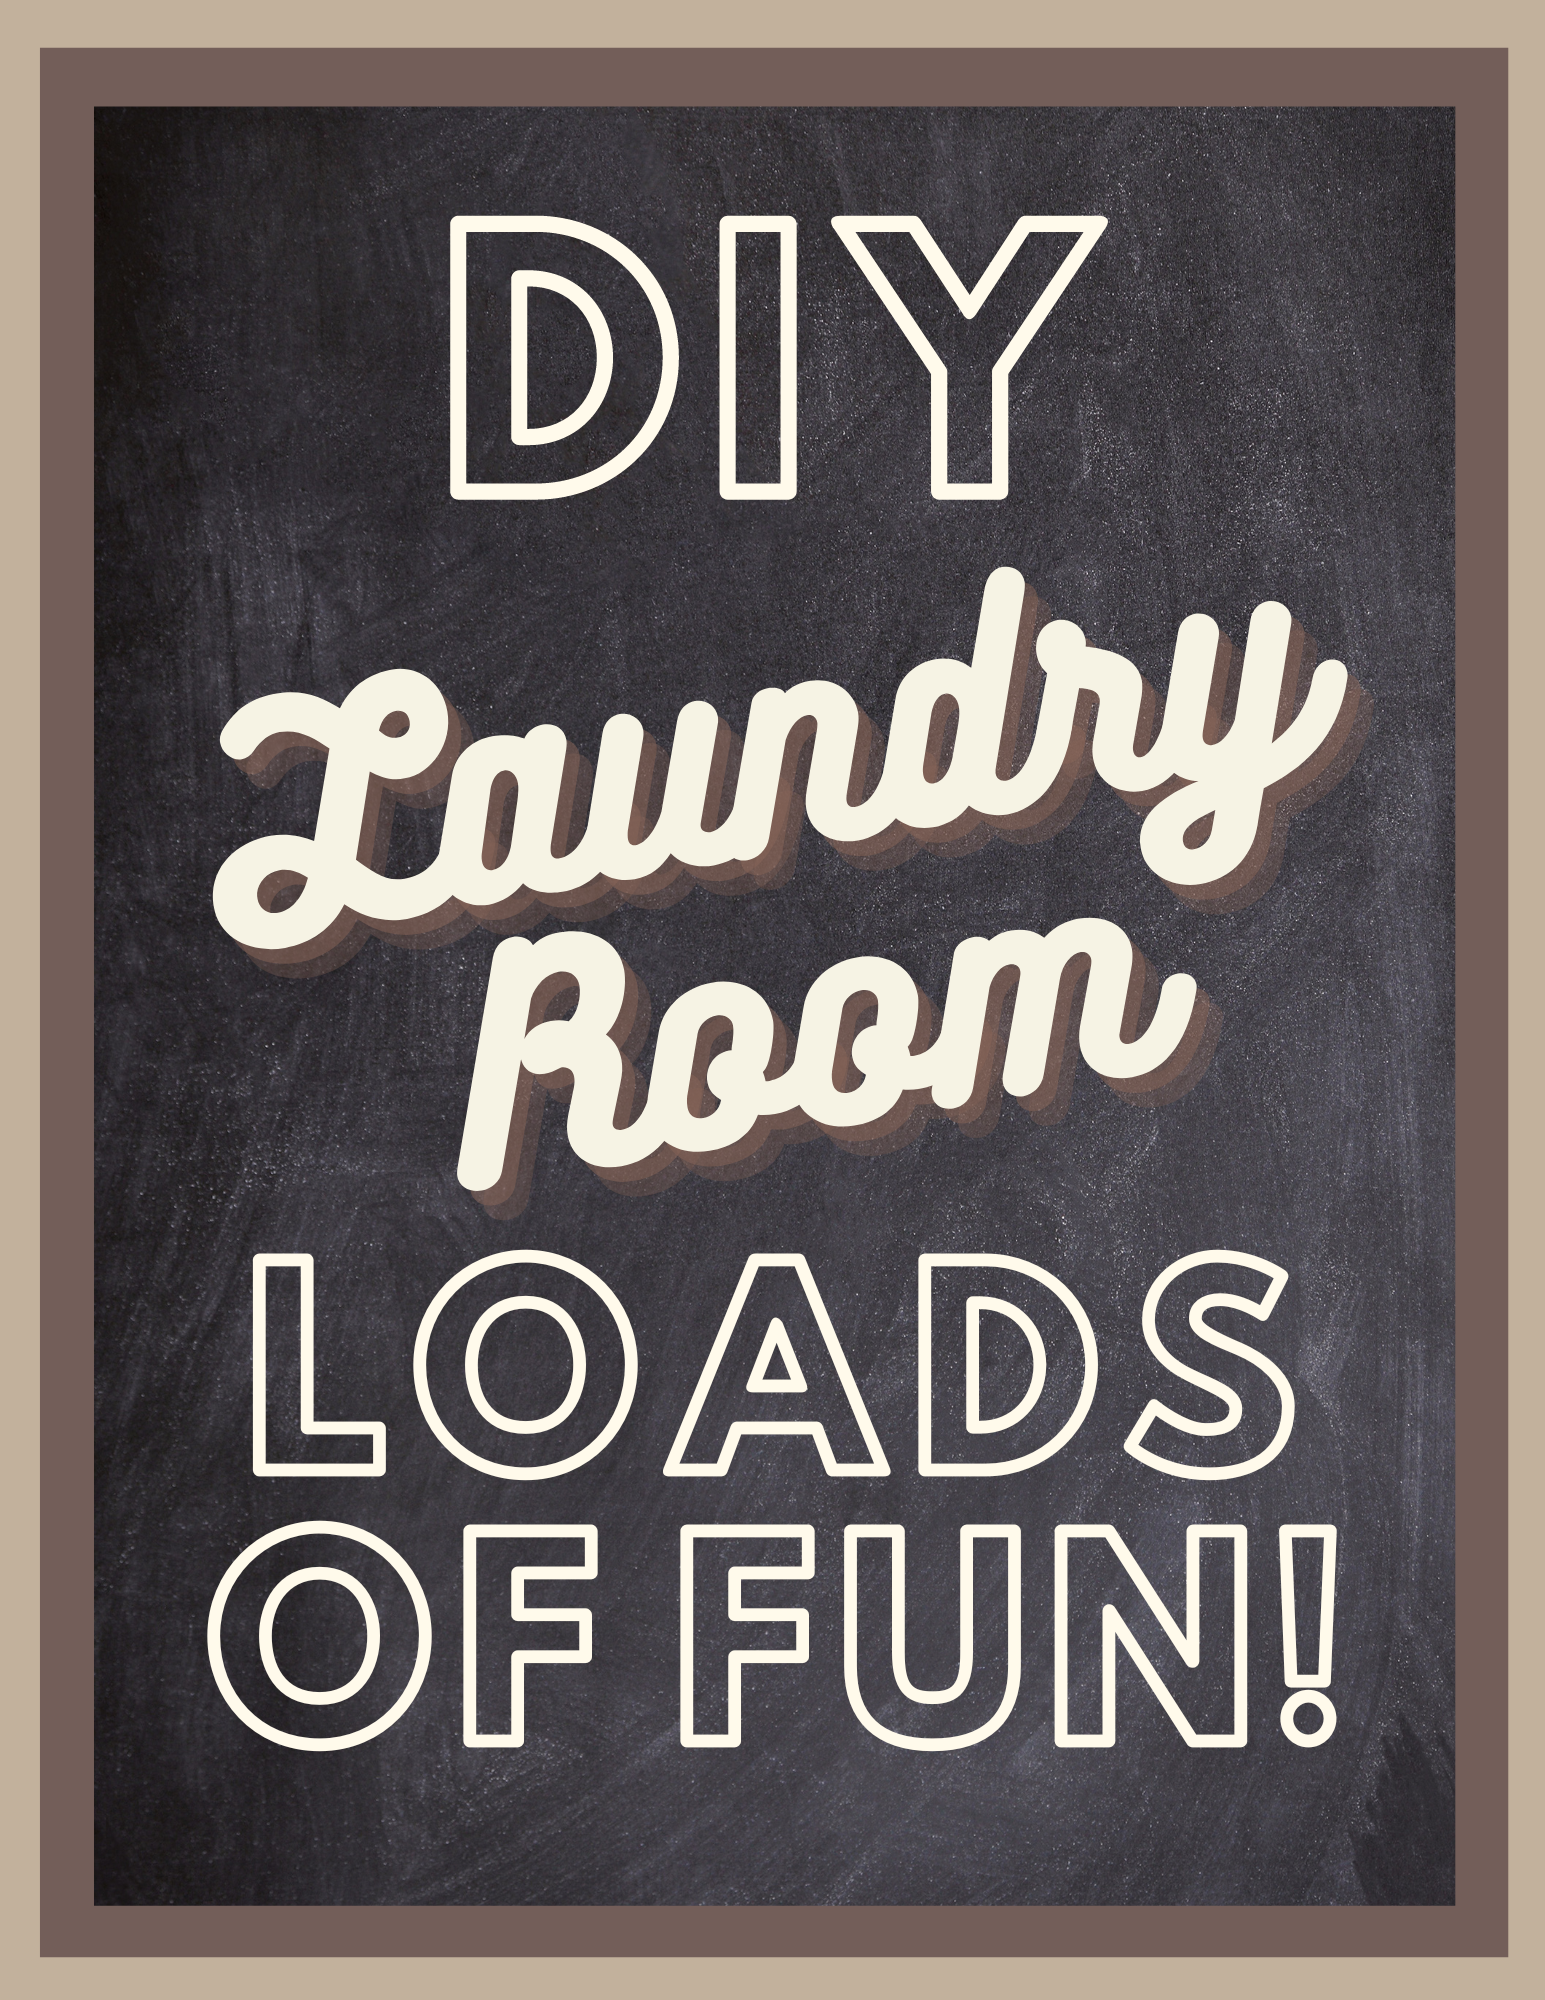 Printable Laundry Room Sign "DIY Laundry Room Loads of Fun!"